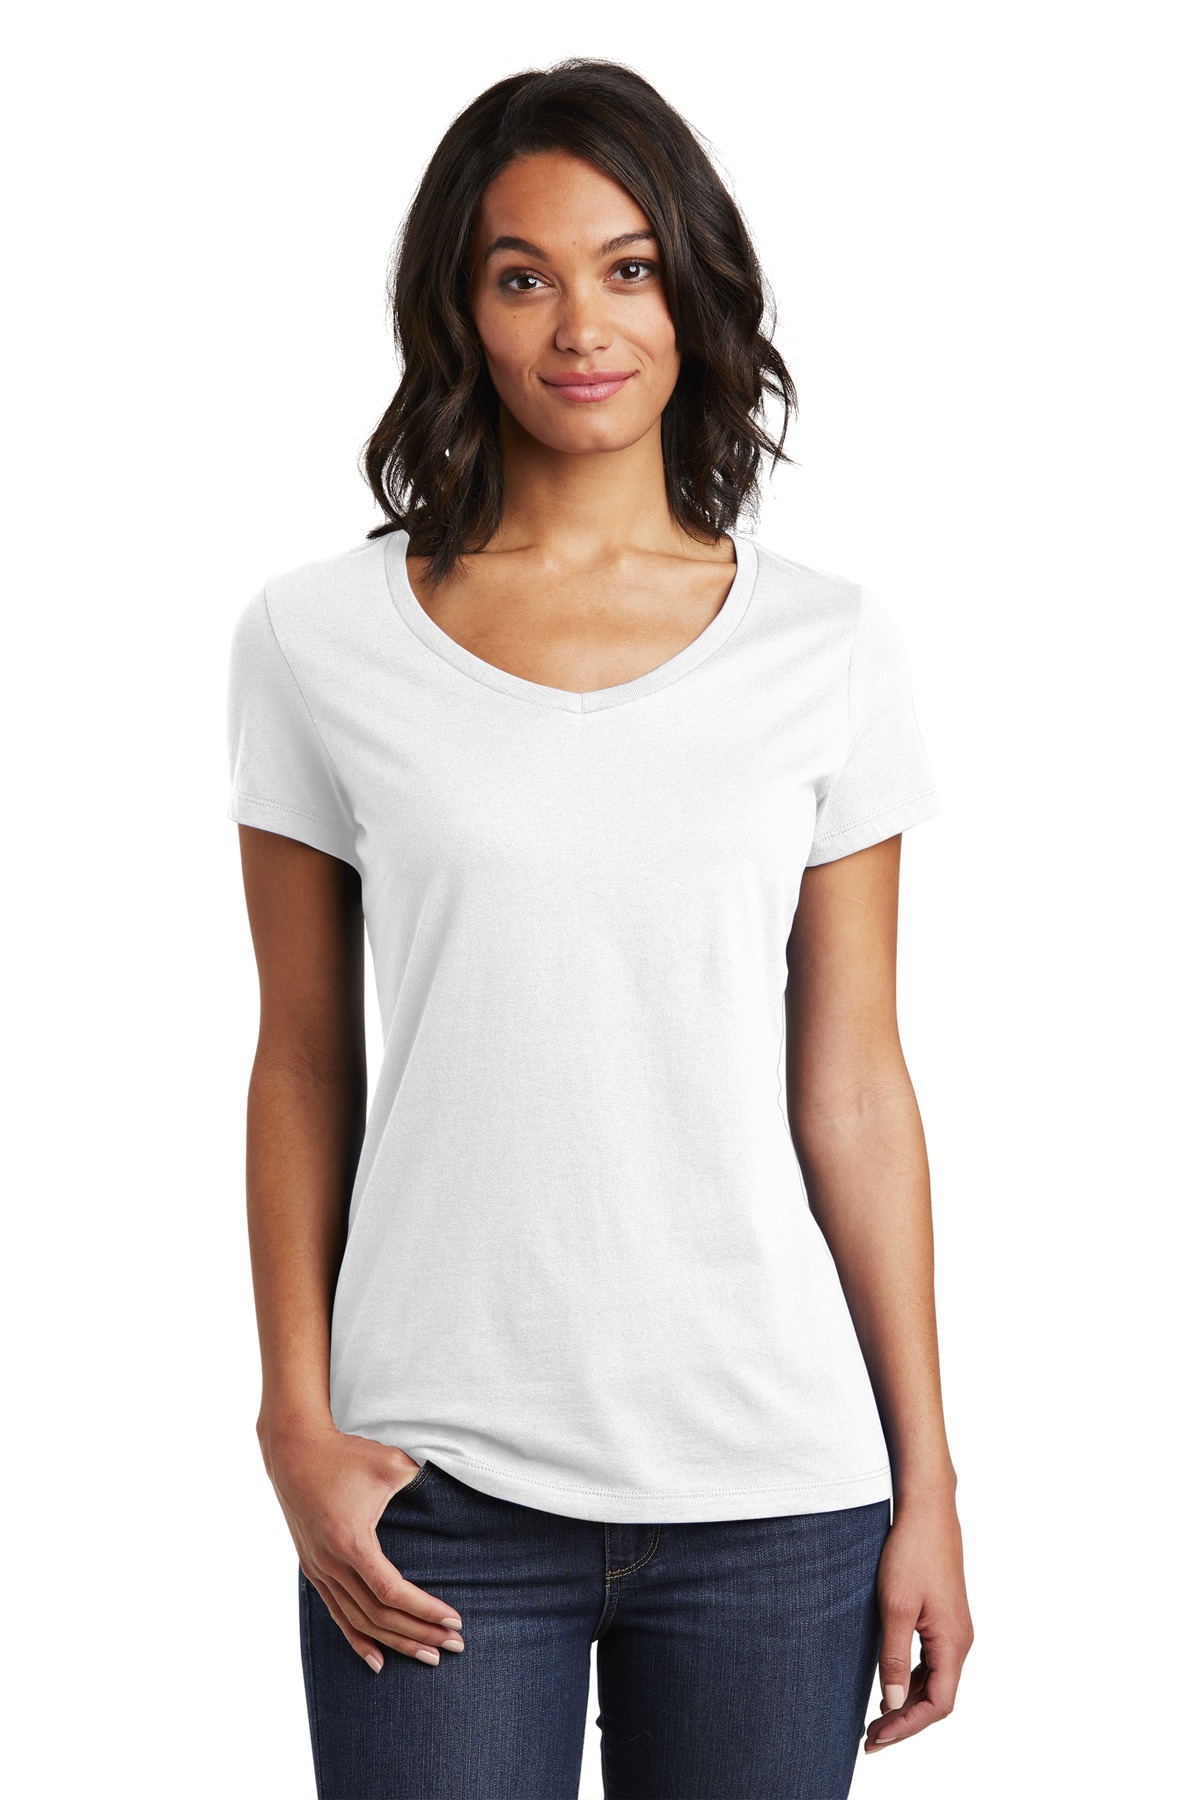 District Women&#8216;s Very Important Tee V-Neck-District